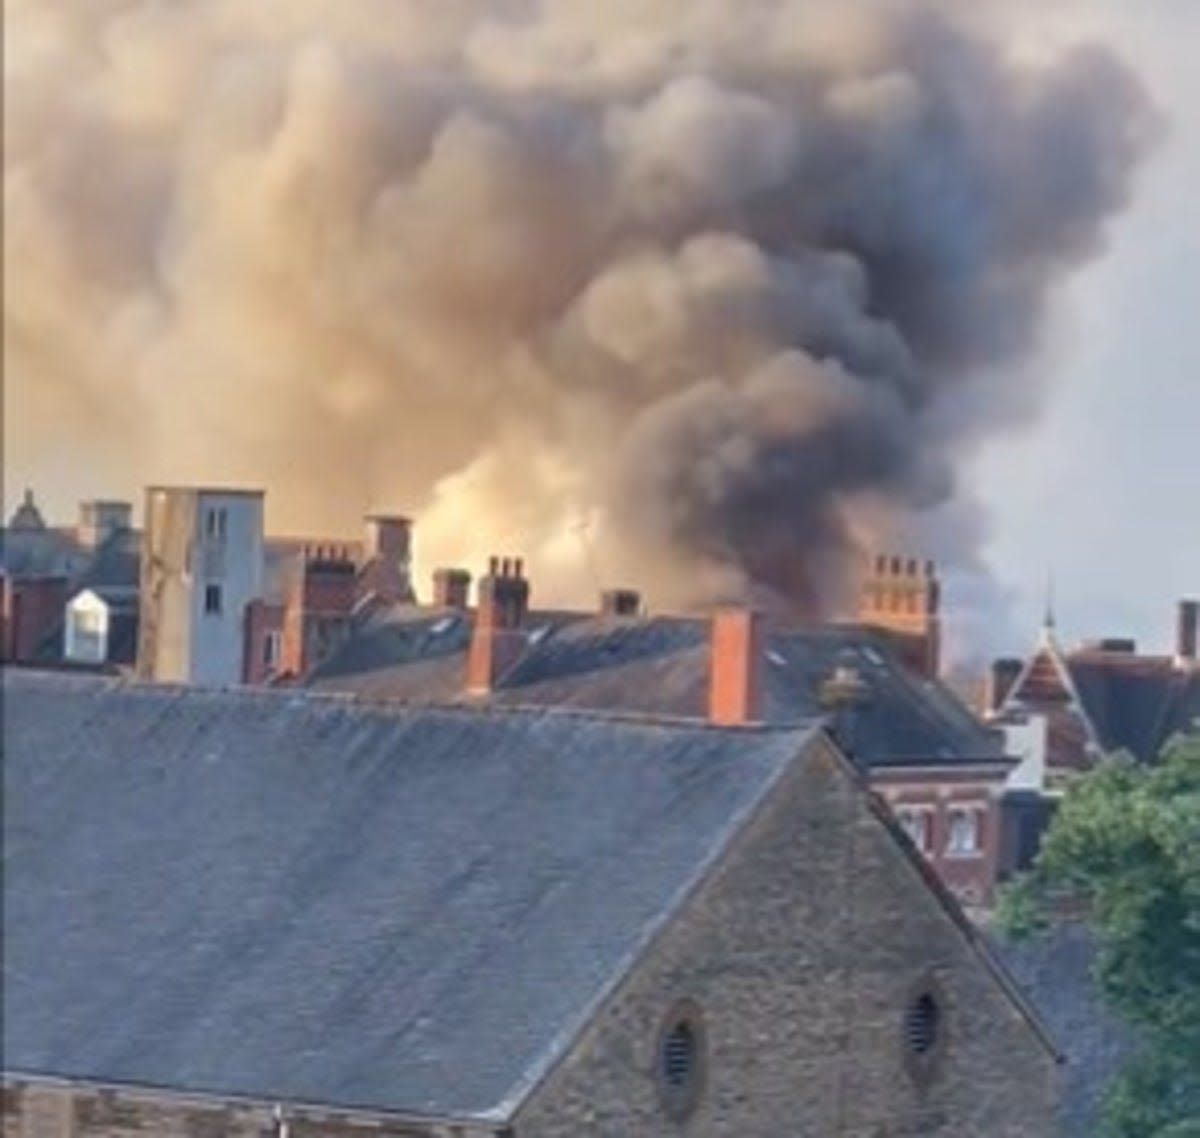 Firefighters tackle huge fire in Northampton as smoke billows above city centre